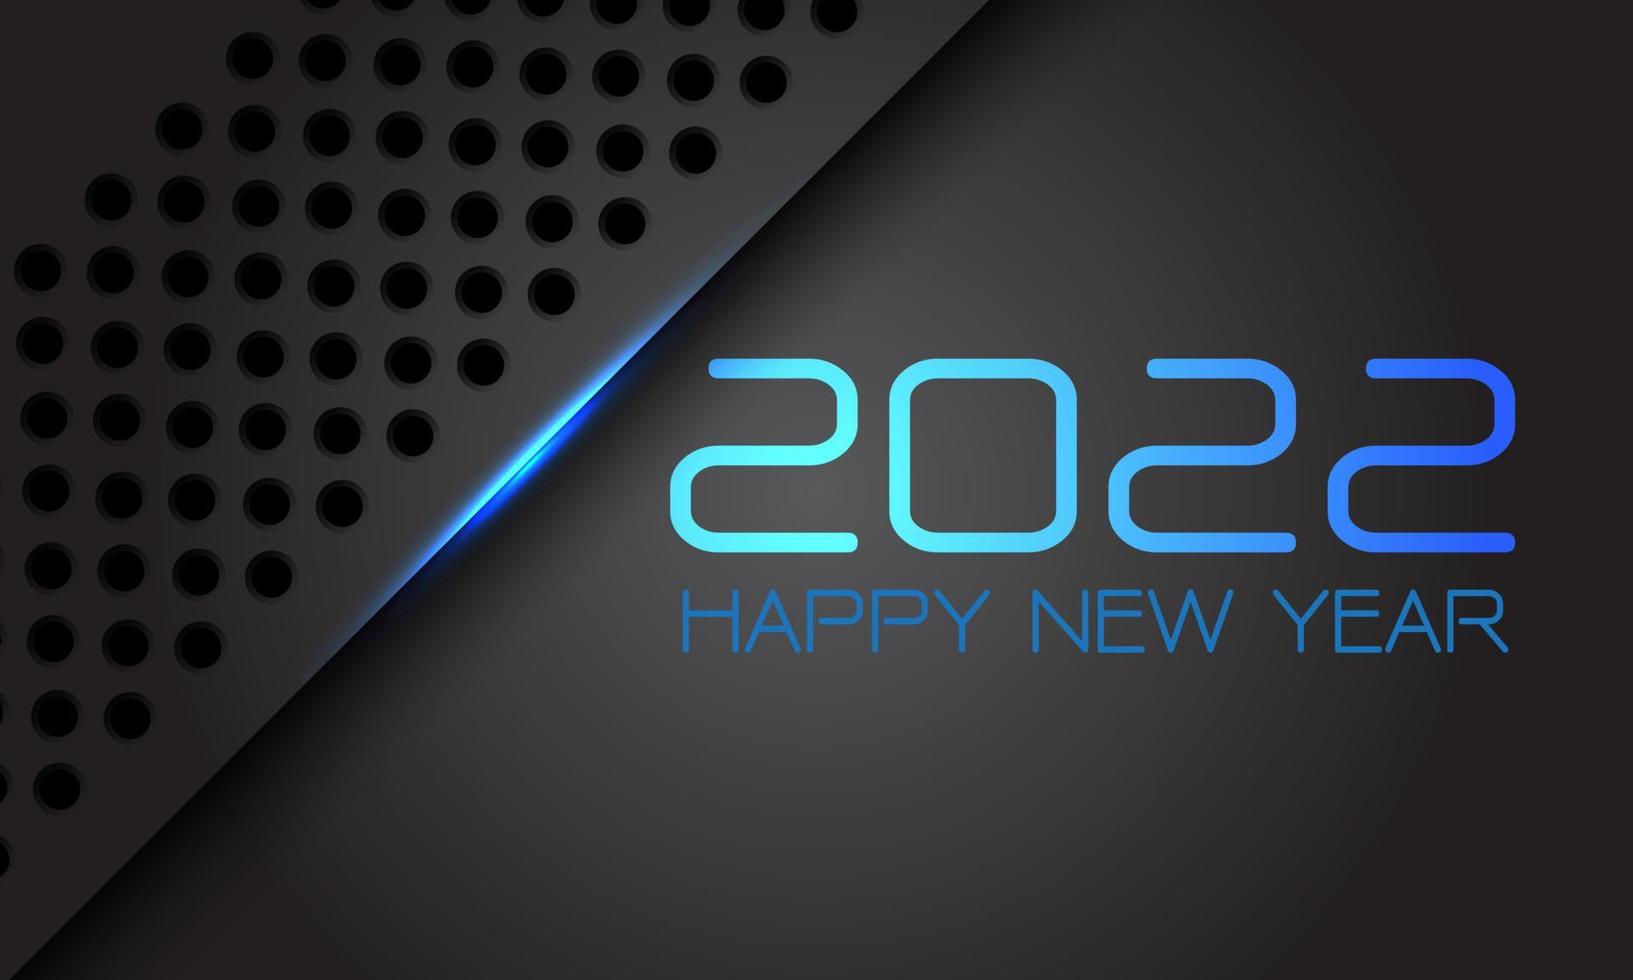 Happy New Year 2022 grey metallic circle mesh blue light text number design for countdown holiday festival celebration party background vector